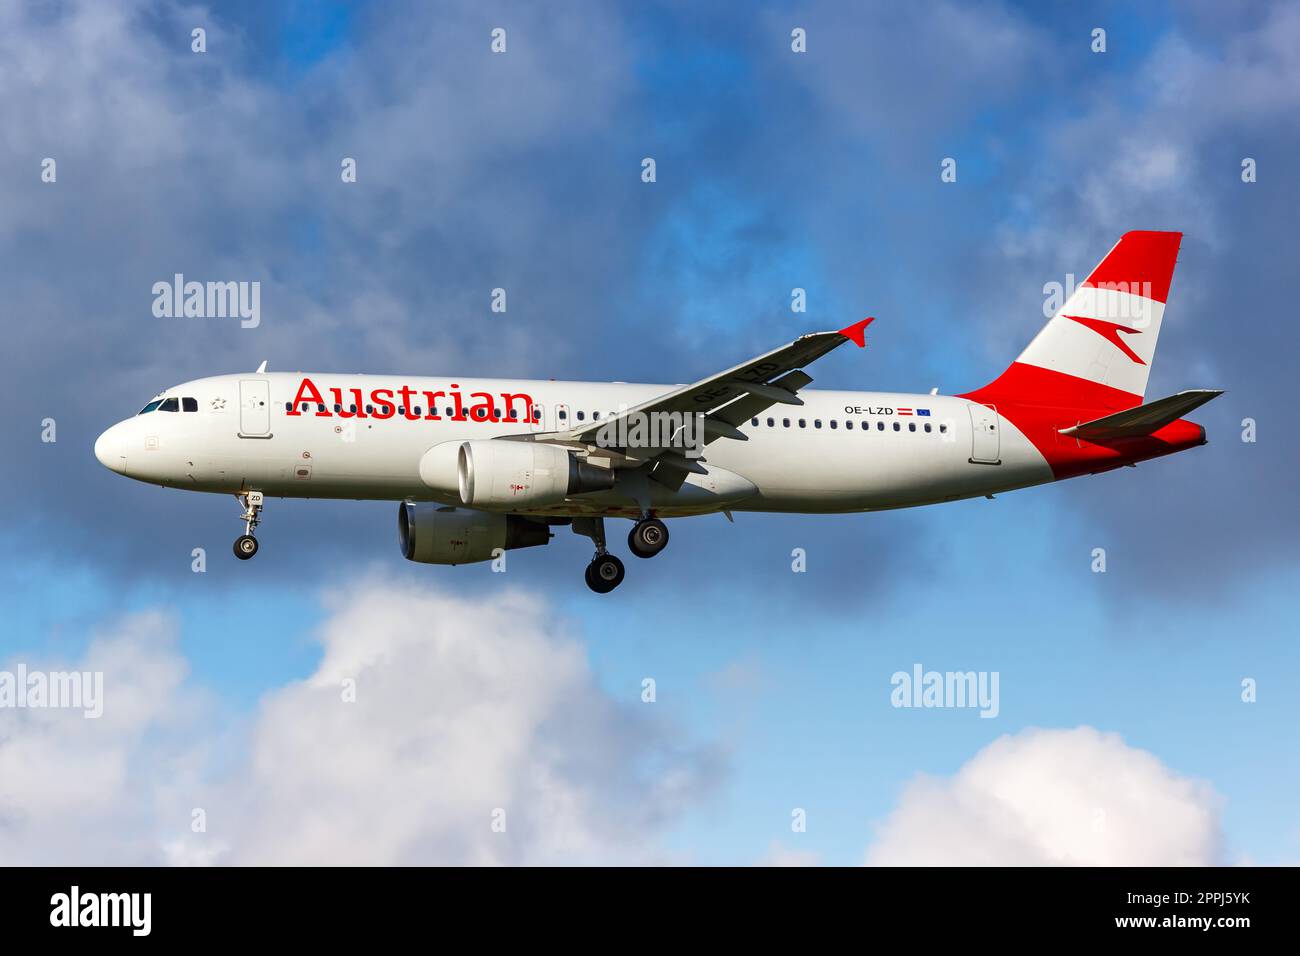 Austrian Airlines Airbus A320 airplane at Amsterdam Schiphol airport in the Netherlands Stock Photo